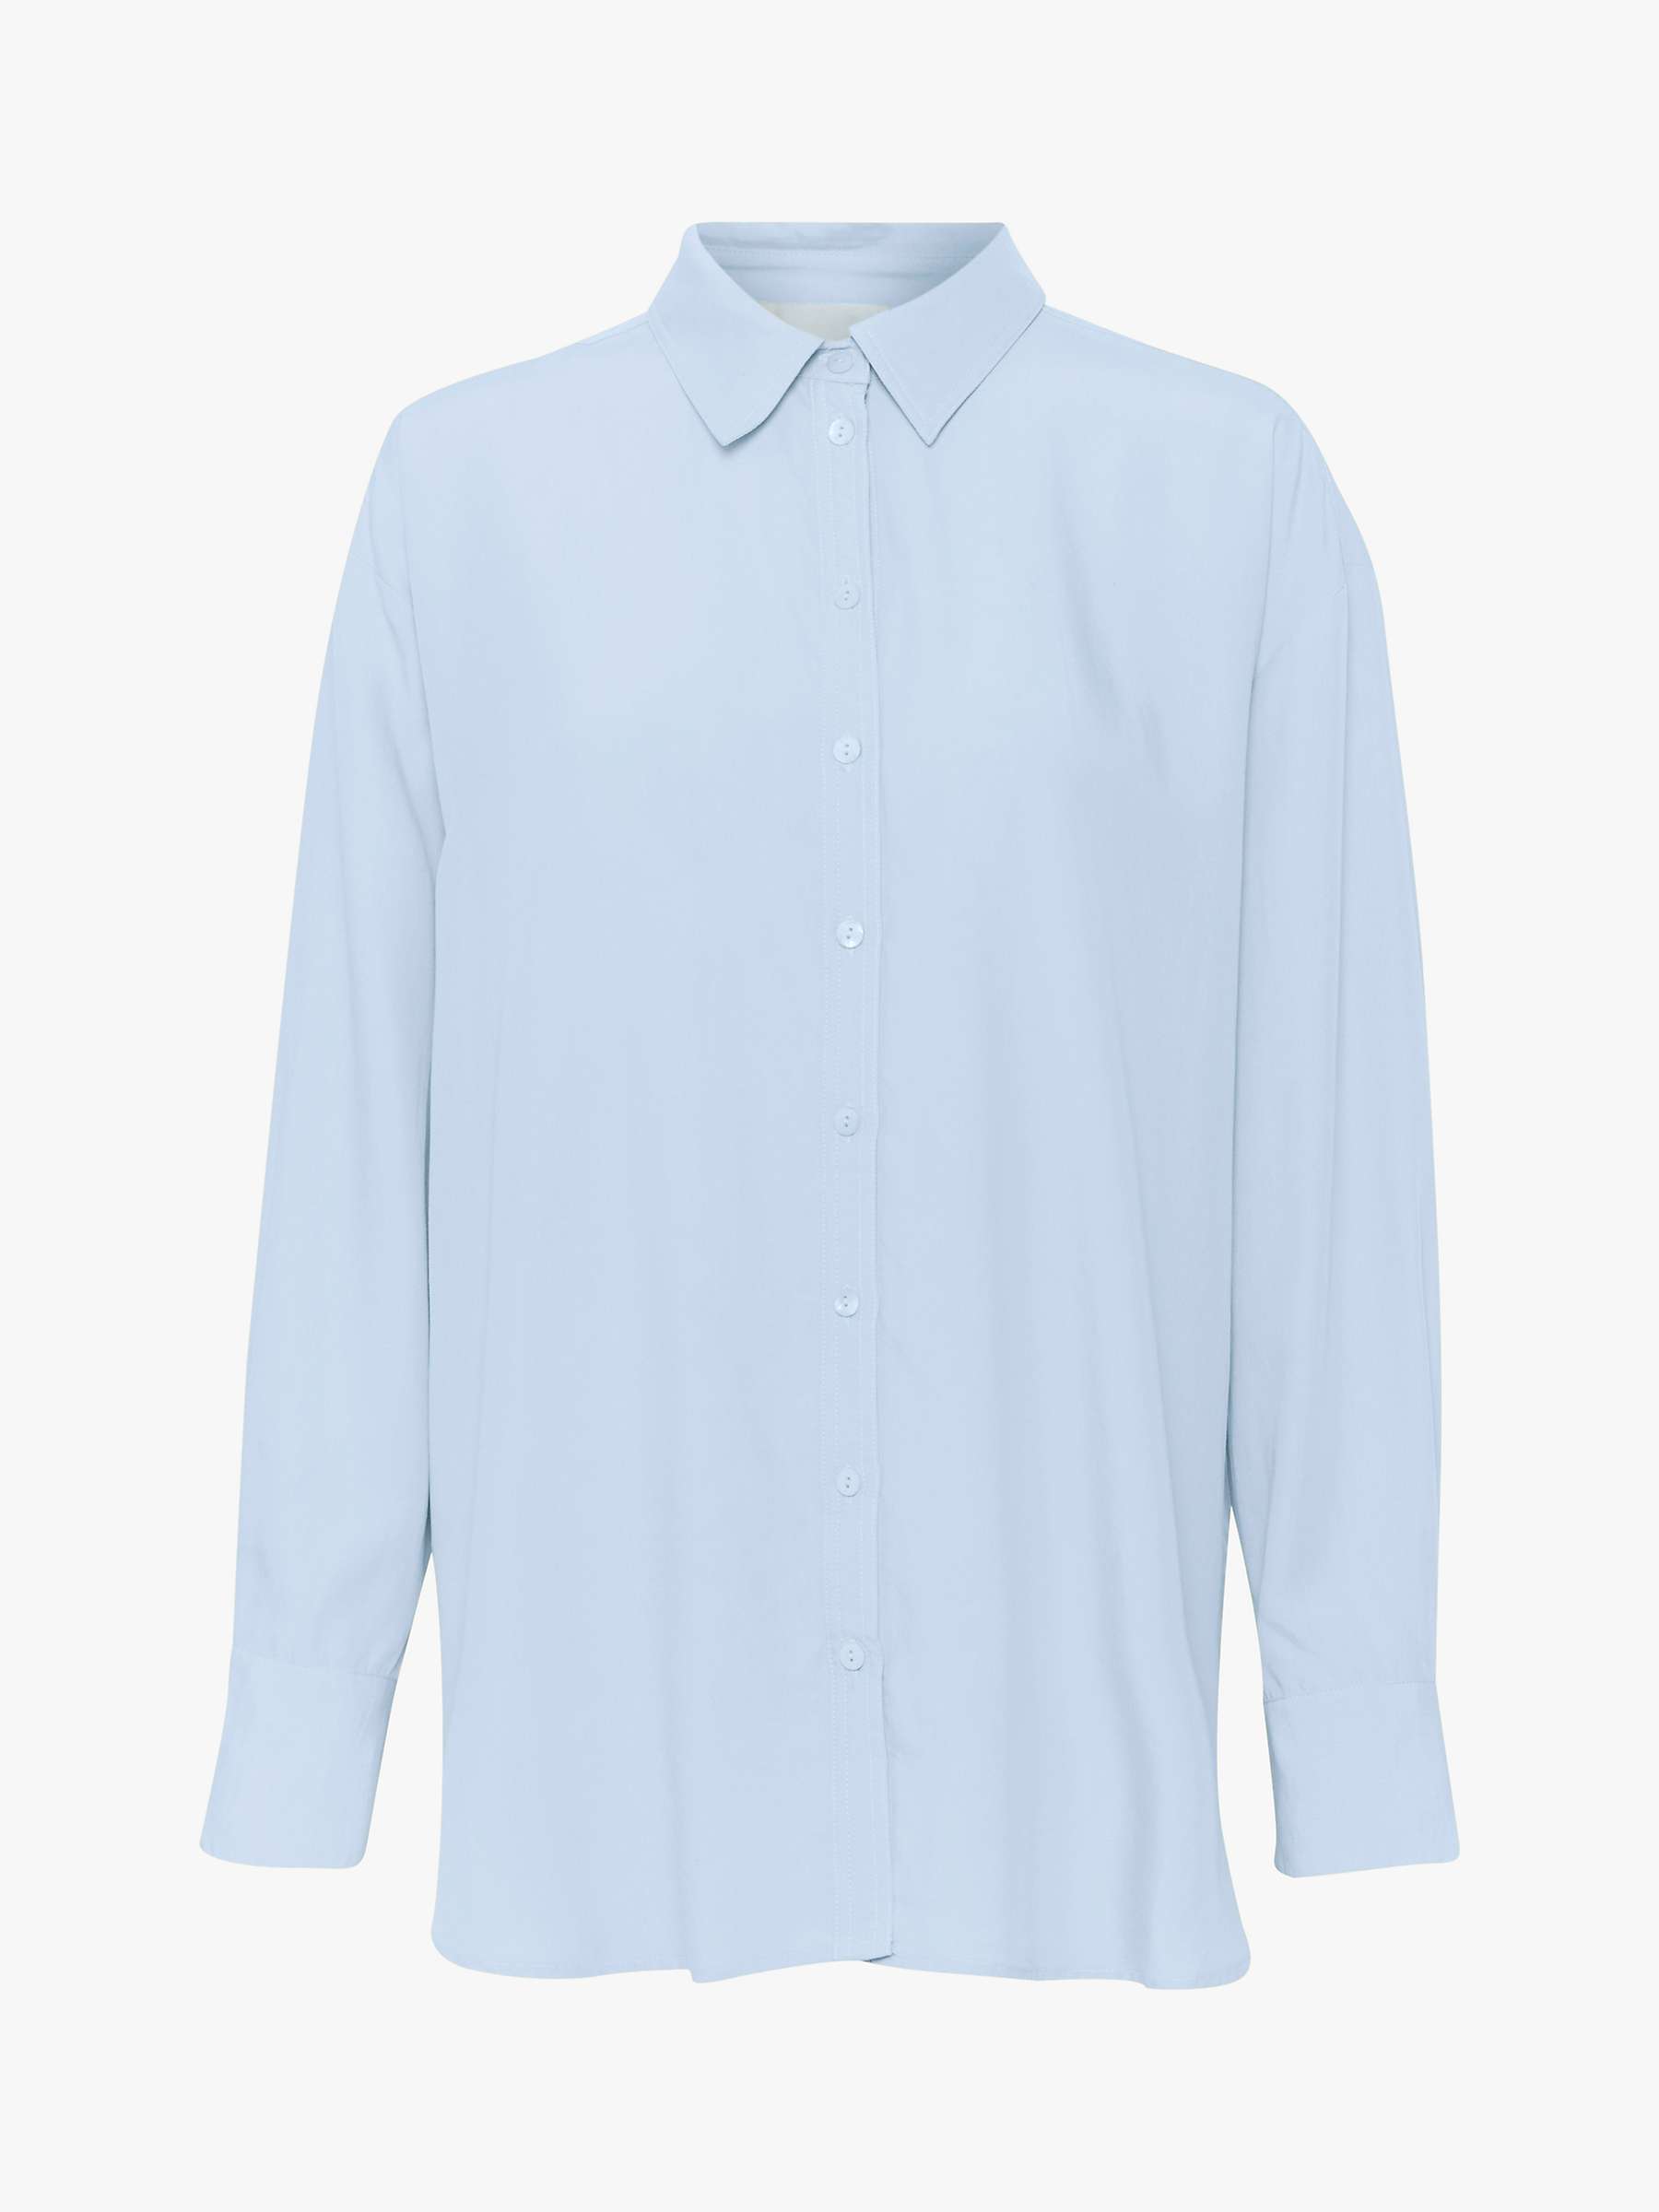 Buy MY ESSENTIAL WARDROBE Tulla Casual Fit Button Up Shirt Online at johnlewis.com